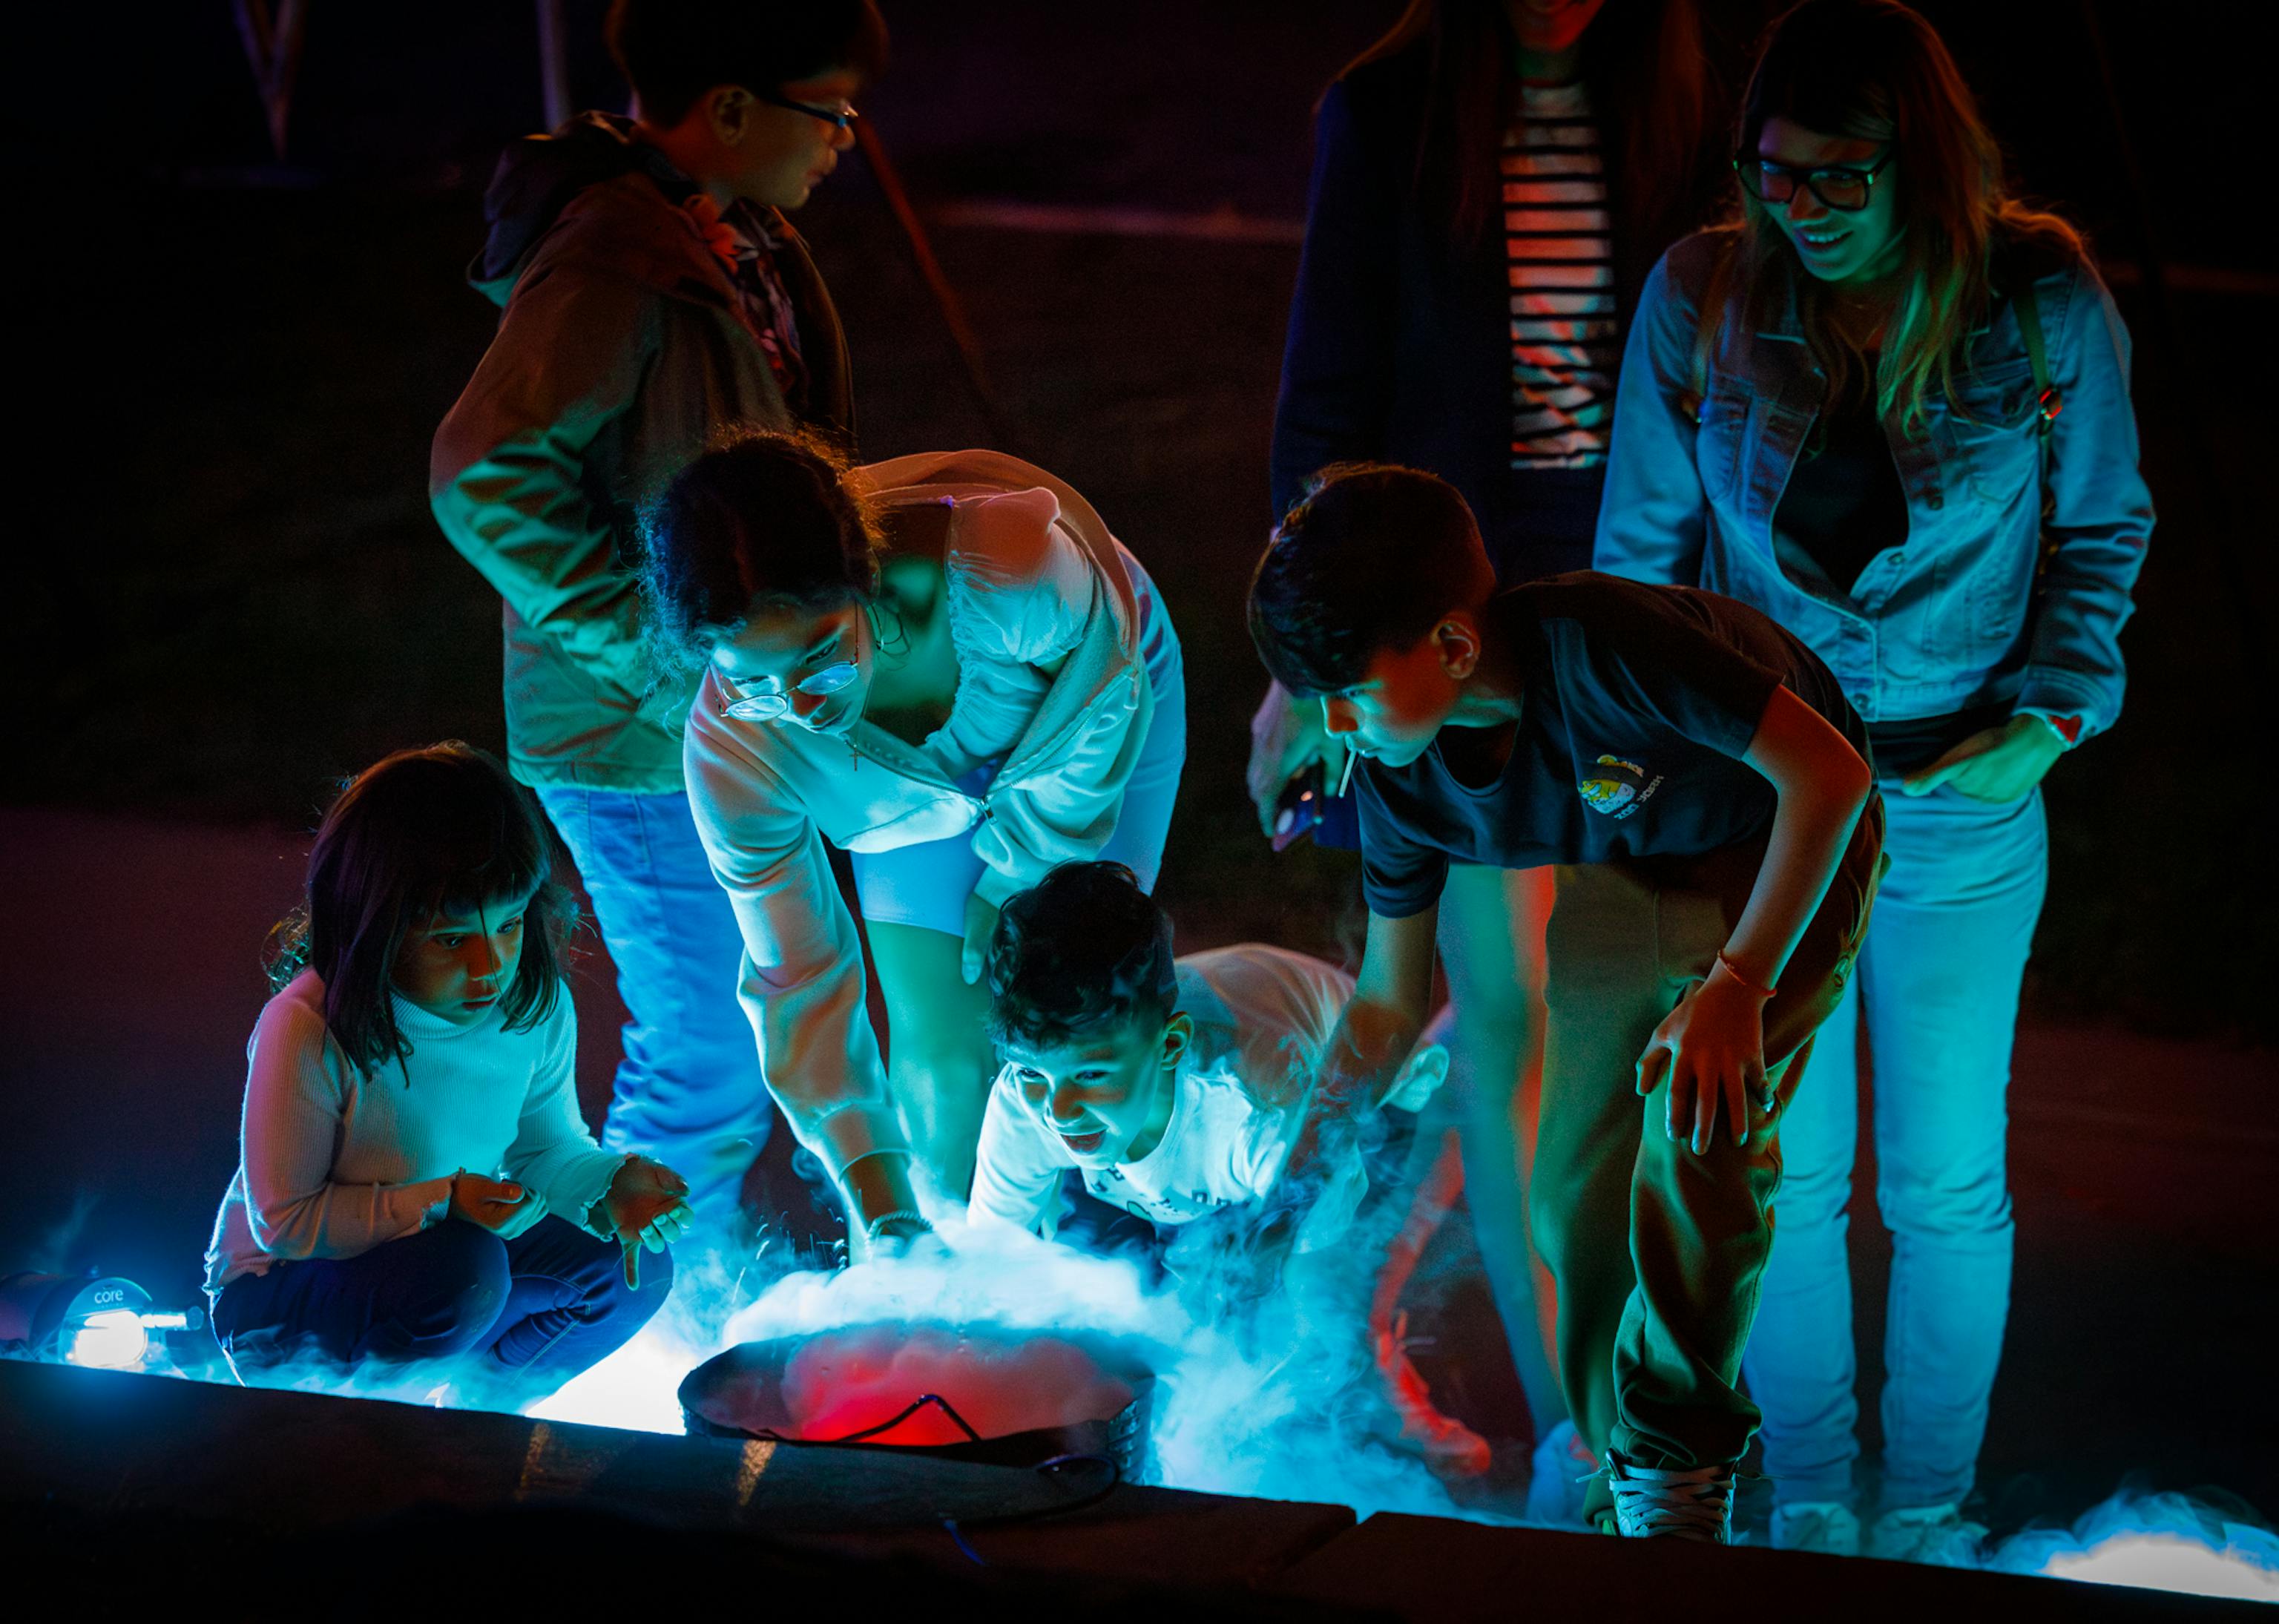 A group of young people looking down at a bucket filled with smoke which is lit in blue lighting